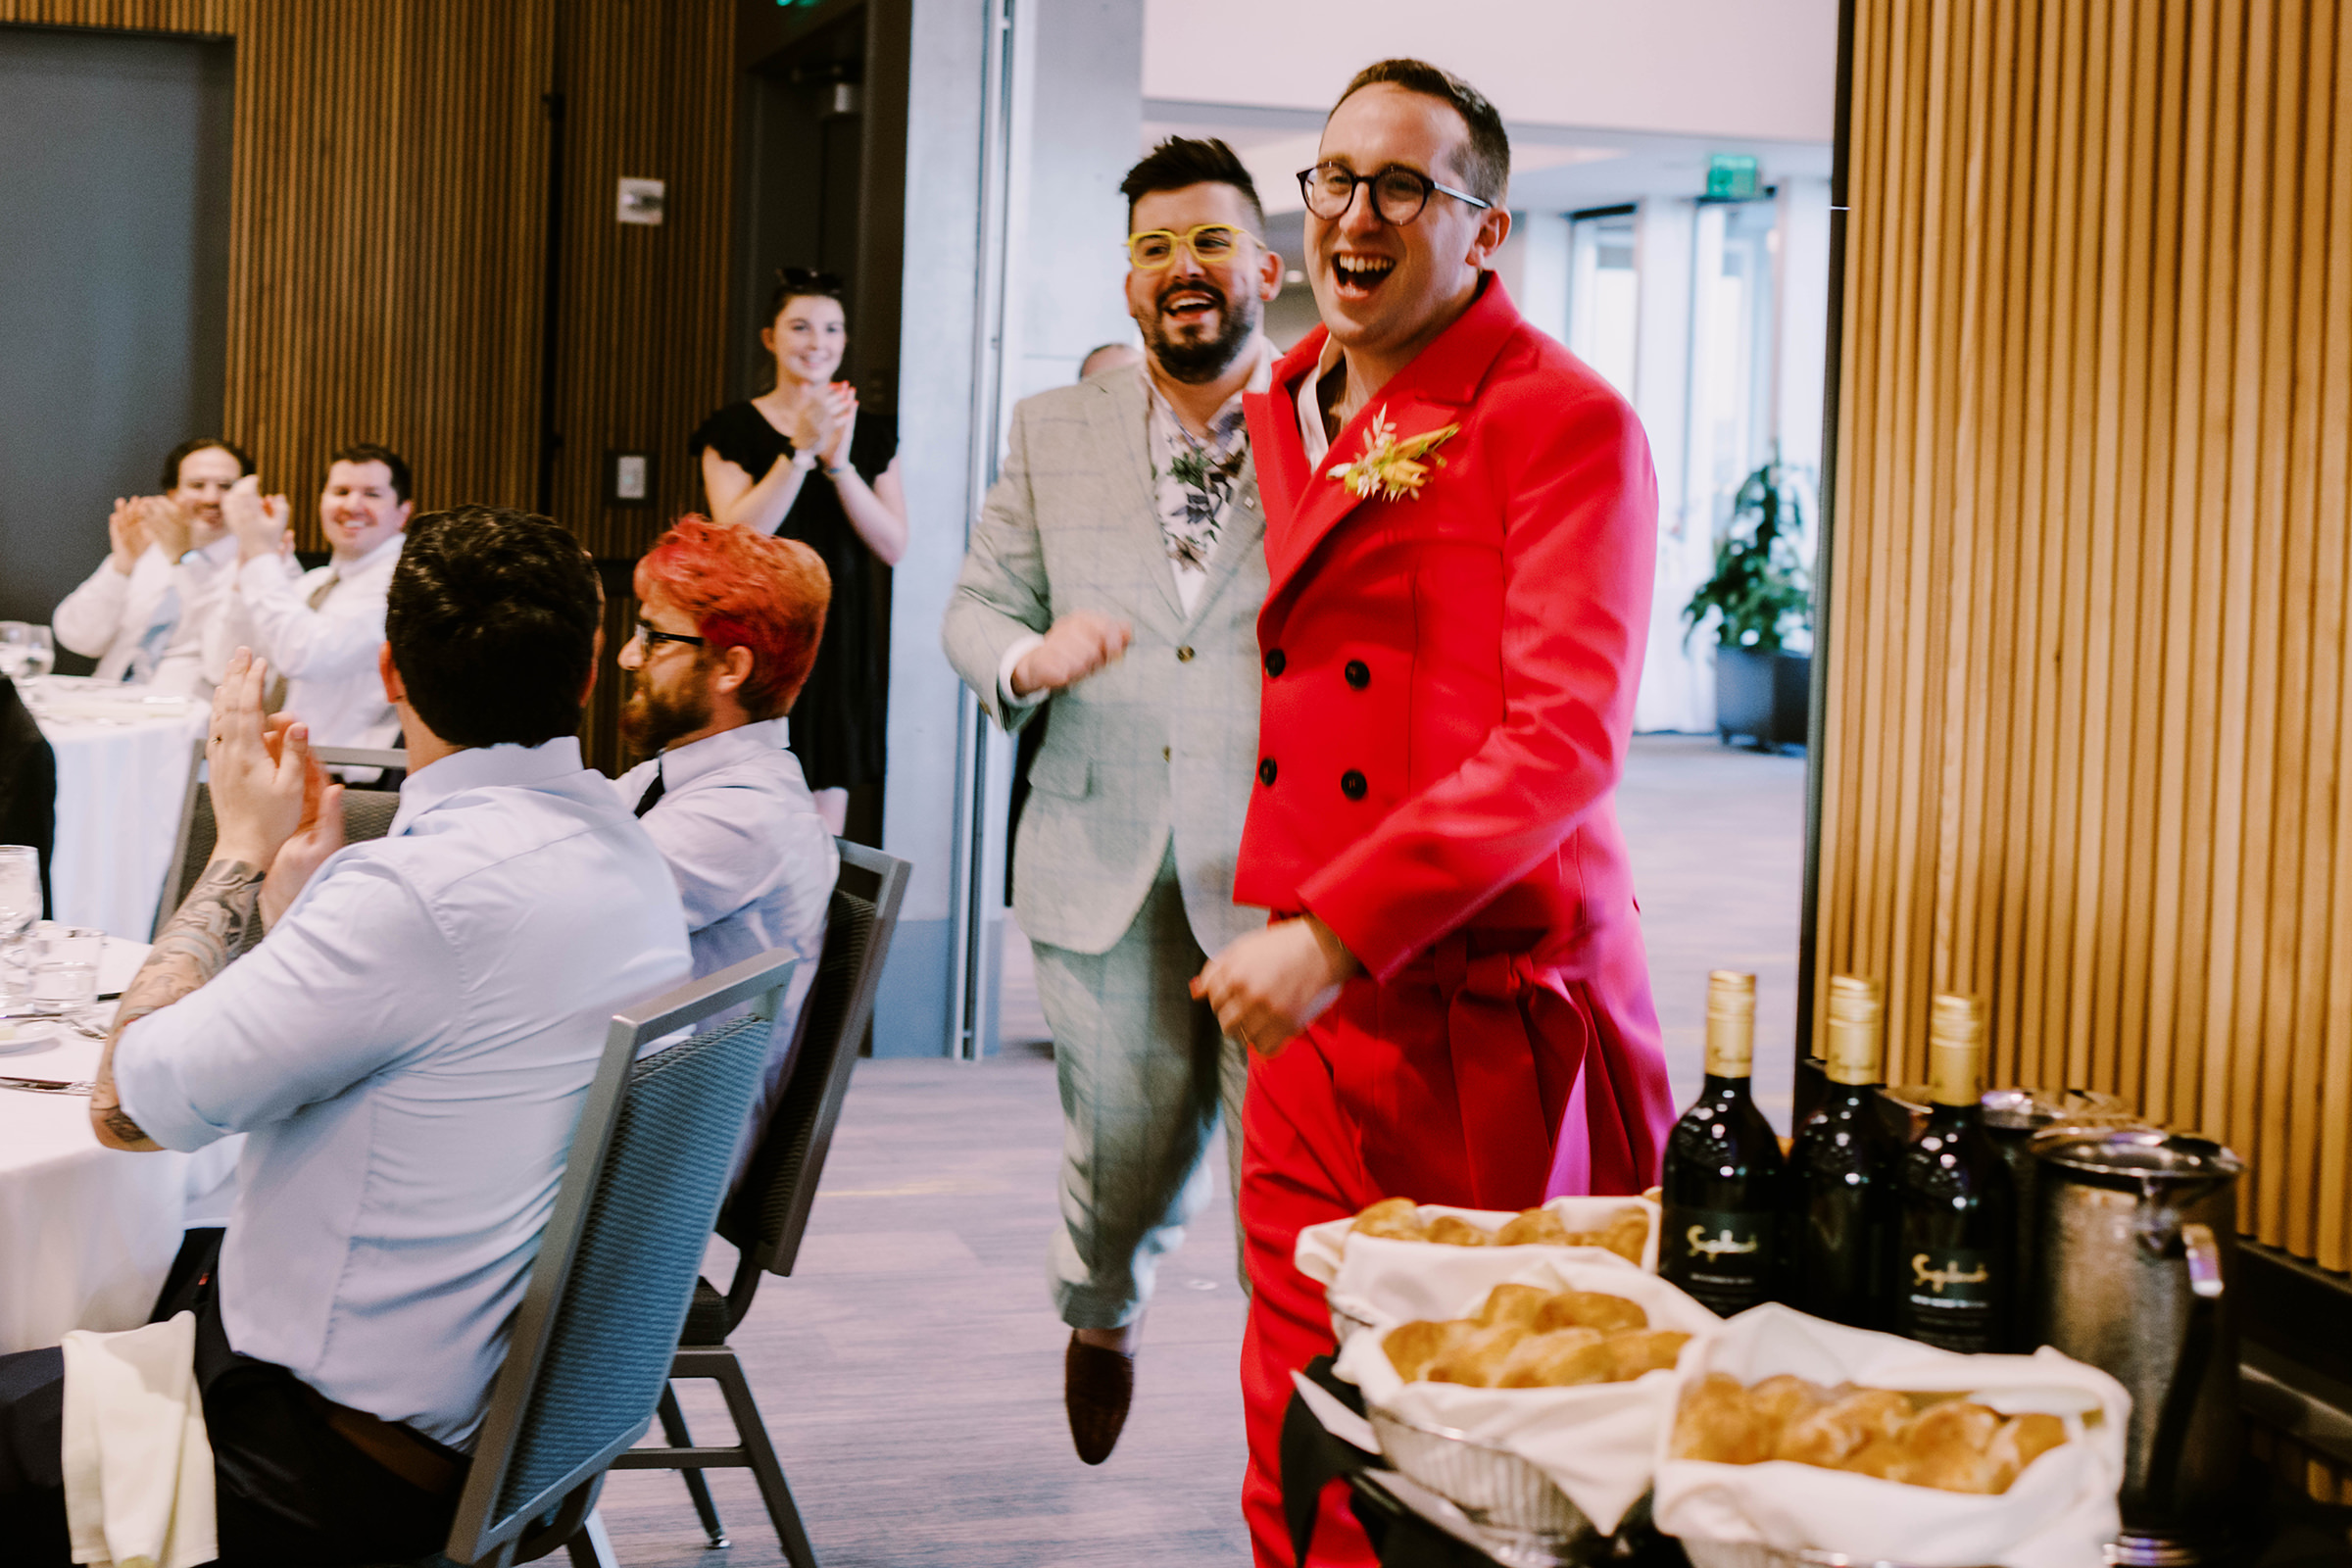 Joey and Dustin's entrance to their wedding reception at Bell Harbor Conference Center, summer 2022